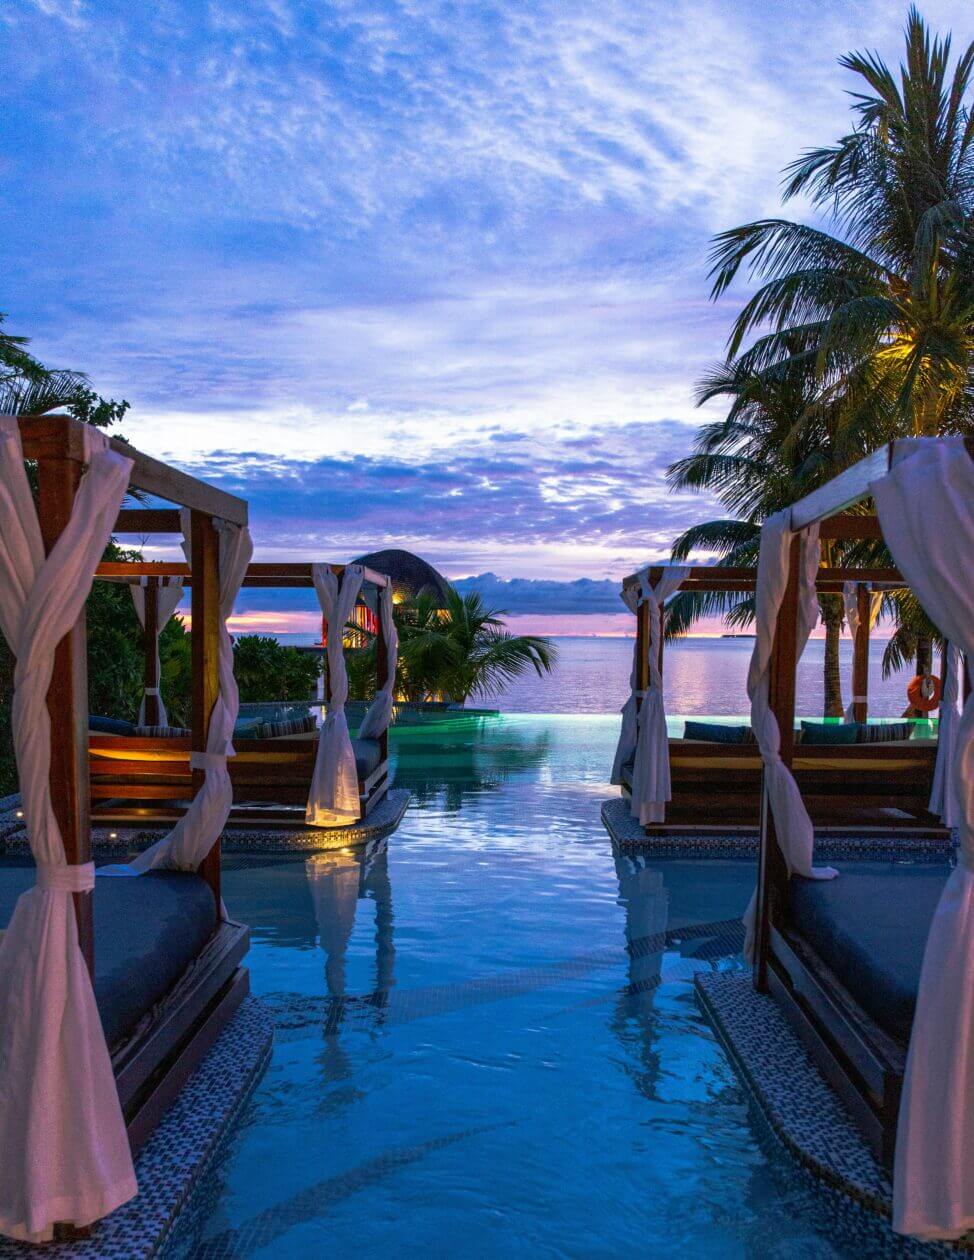 hotel website design company in vietnam taking photo showing beautiful sunset and lounge beds by the pool.